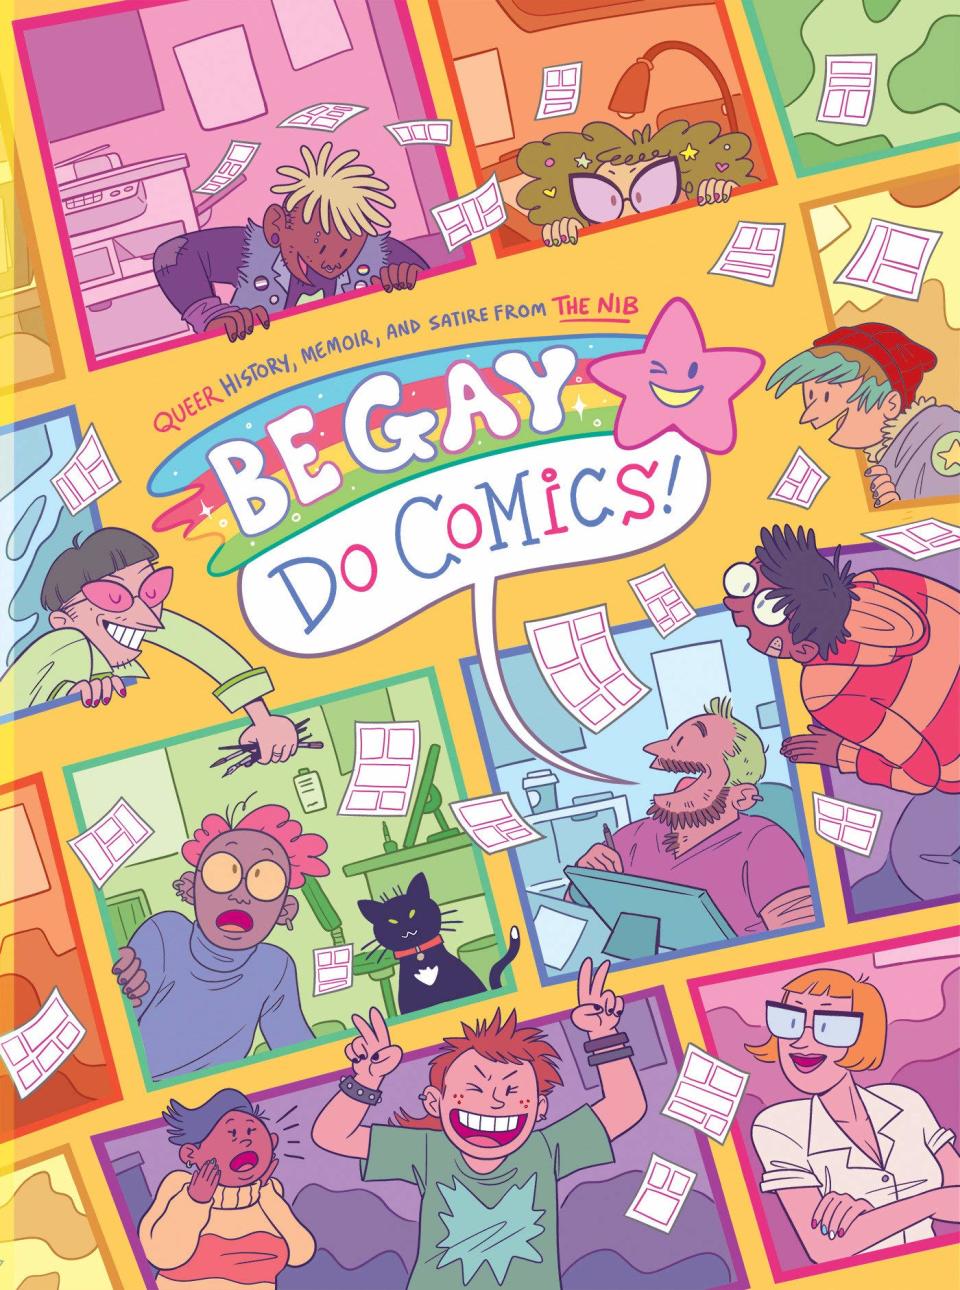 "Be Gay, Do Comics! Queer History, Memoir and Satire"